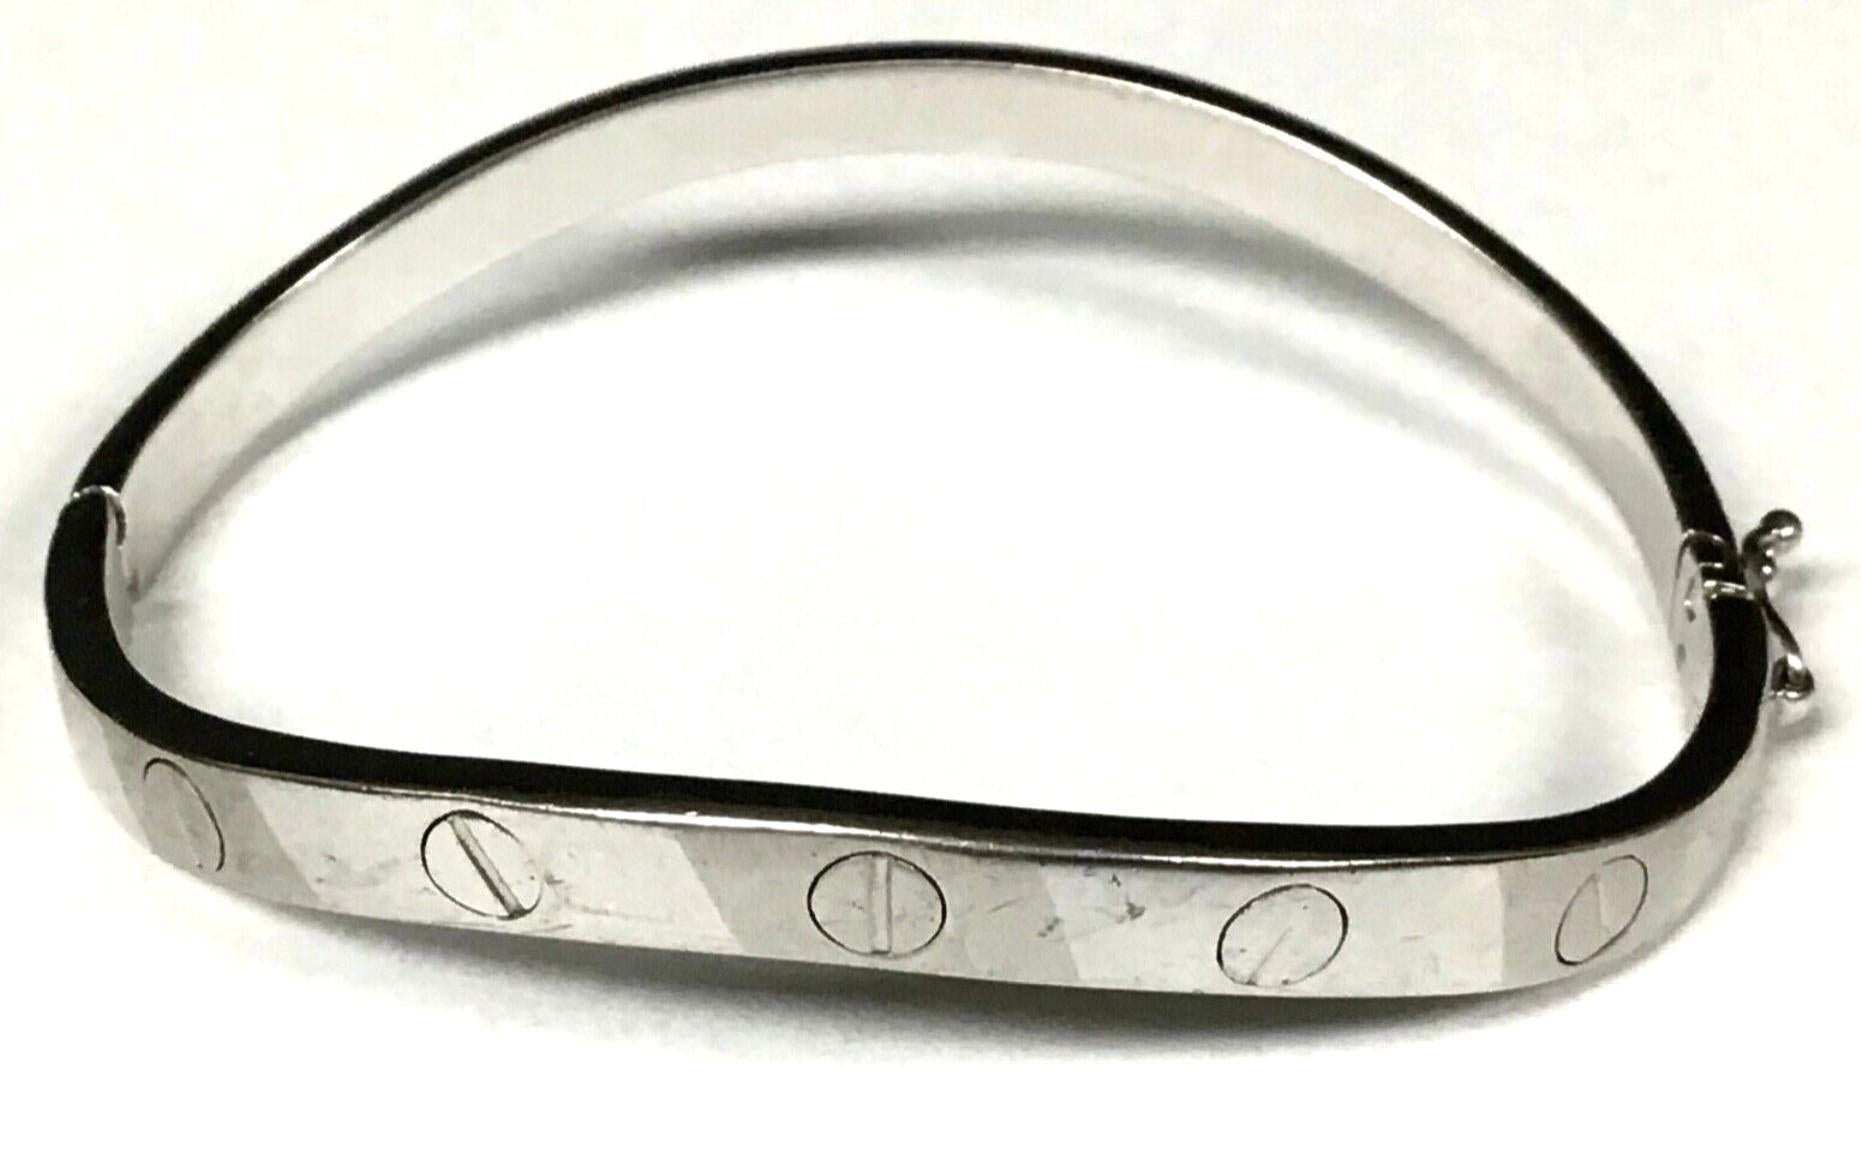 Solid 14K White Gold Cartier Style Cuff Bracelet W/Screw Design Accents & Patinated / polished Surface (18.85 Grams) - This bracelet is made of solid 14k white gold and has a beautiful diamond-cut surface. Measures: 2.55